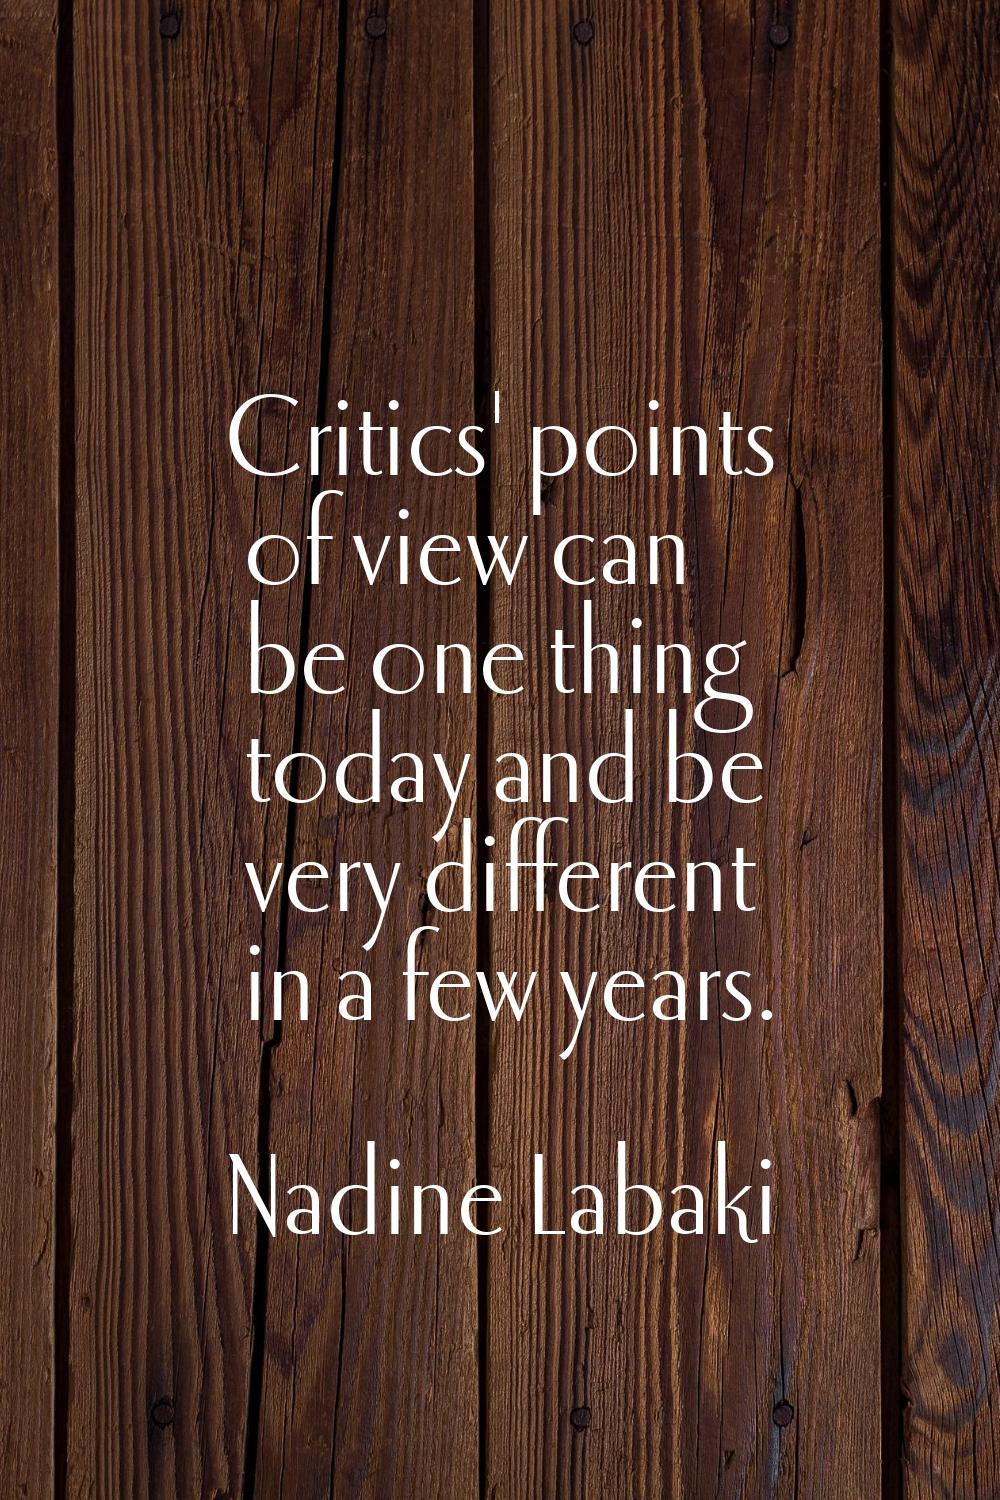 Critics' points of view can be one thing today and be very different in a few years.